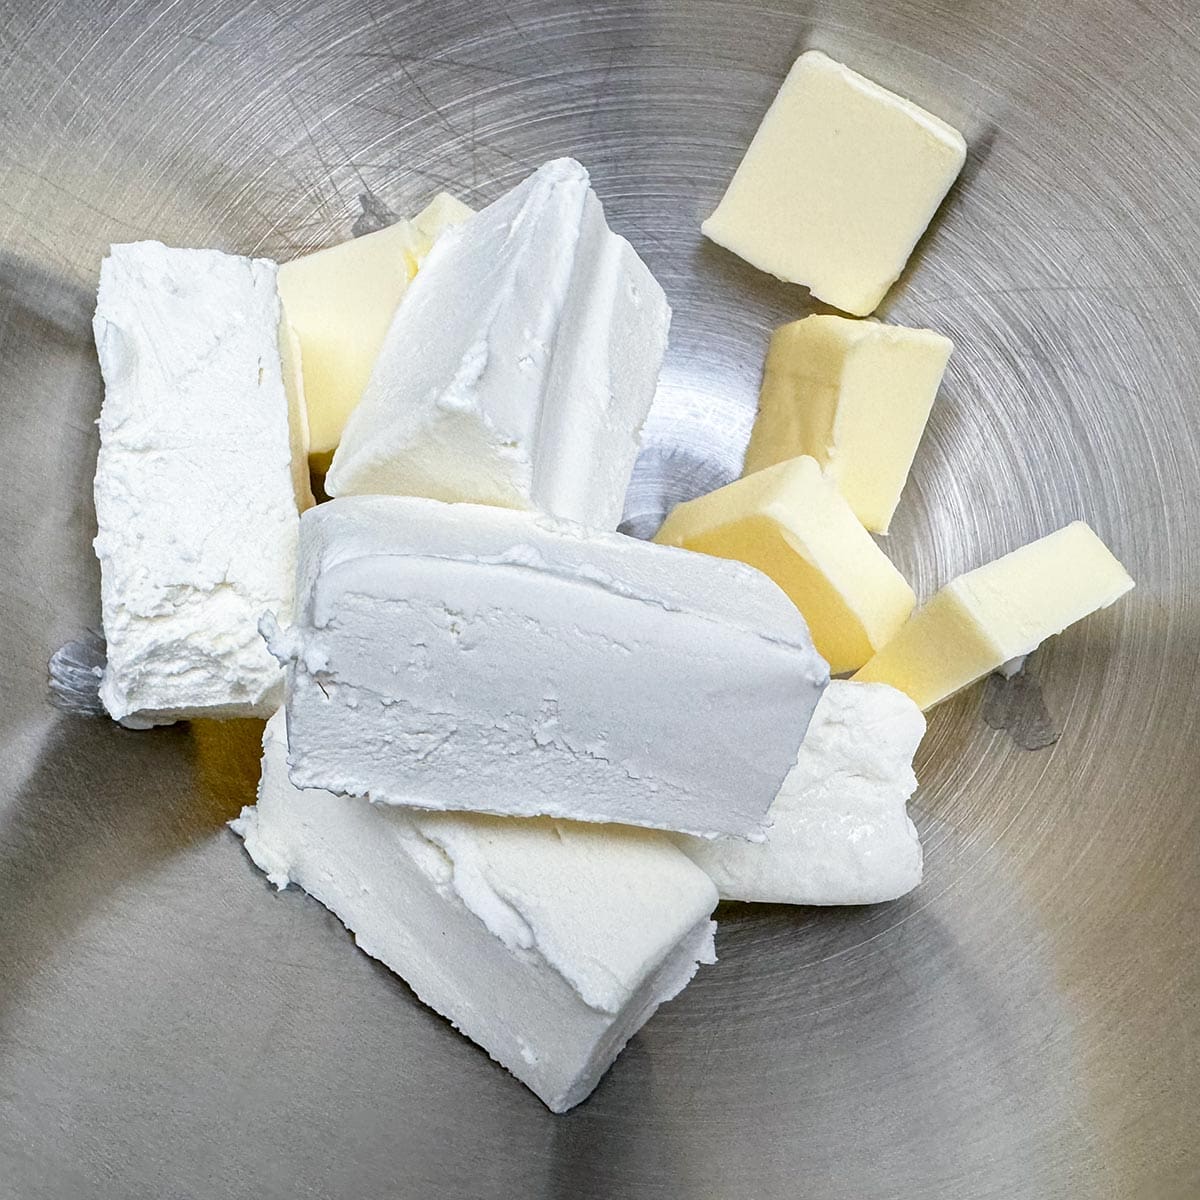 Cubes and slices of butter and cream cheese are getting ready to be mixed.